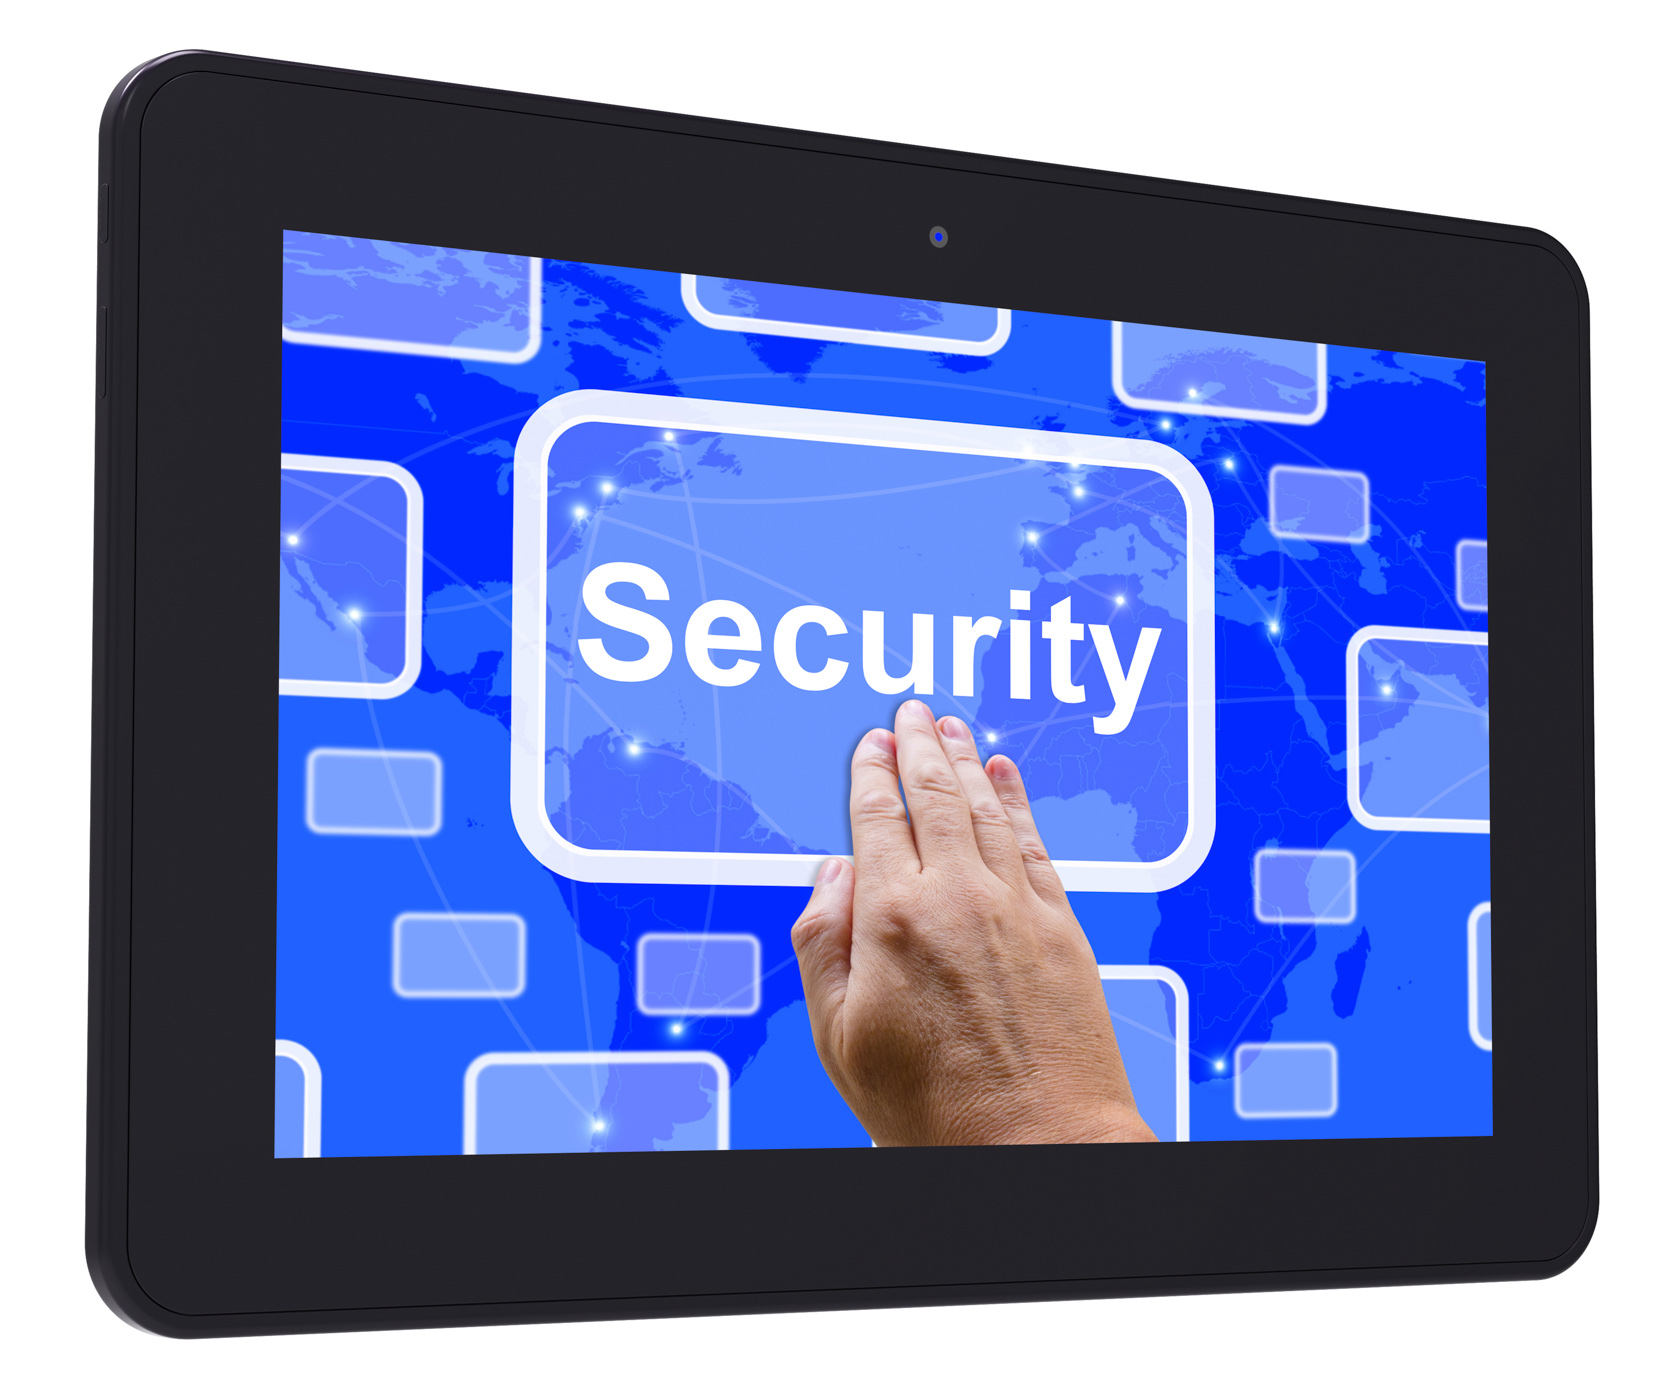 Security tablet touch screen shows privacy encryptions and safety photo